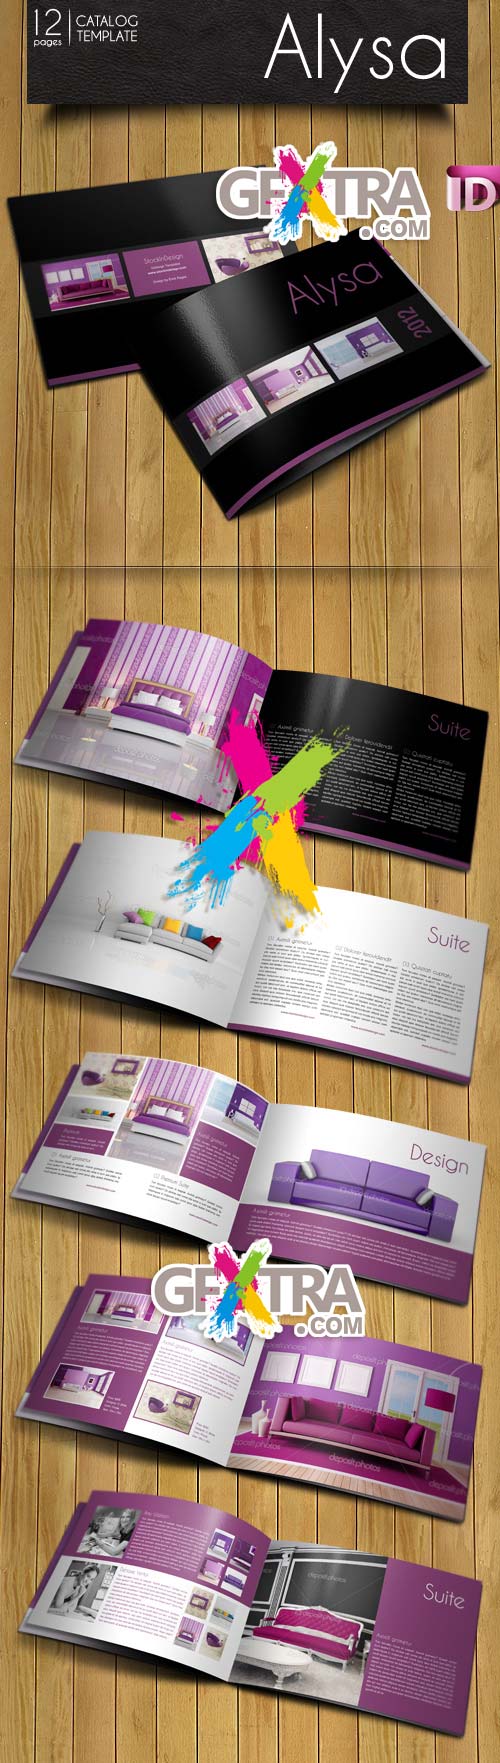 12 Pages Catalog Template INDD - Alysa